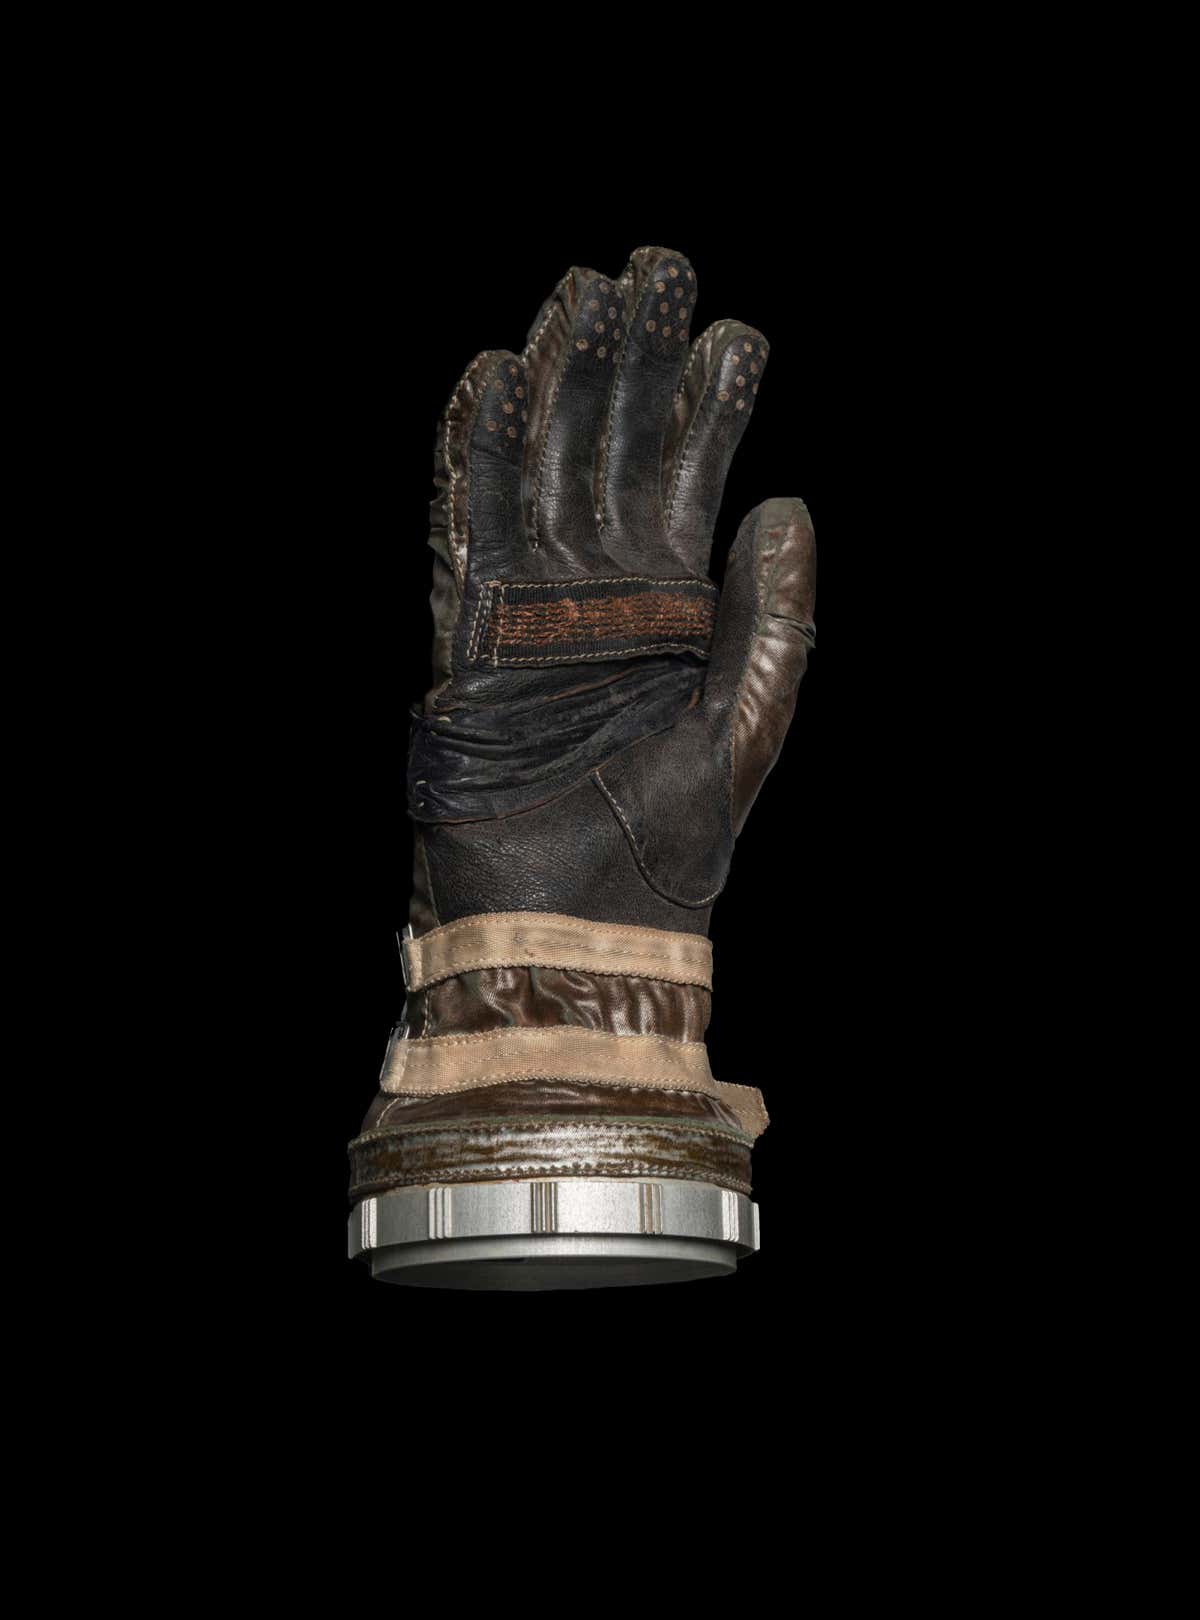 GLOVES IN SPACE Not all space debris is composed of broken rockets and dead satellites. Occasionally astronauts drop things overboard as well. A spacesuit glove similar to this one was lost during a space walk from the Gemini IV mission in 1965. It had been left in the airlock, so when a fully suited Ed White opened the exterior door to make his way outside, the glove floated off as well. Estimates suggest that it spent a month orbiting the Earth before re-entering and burning up.